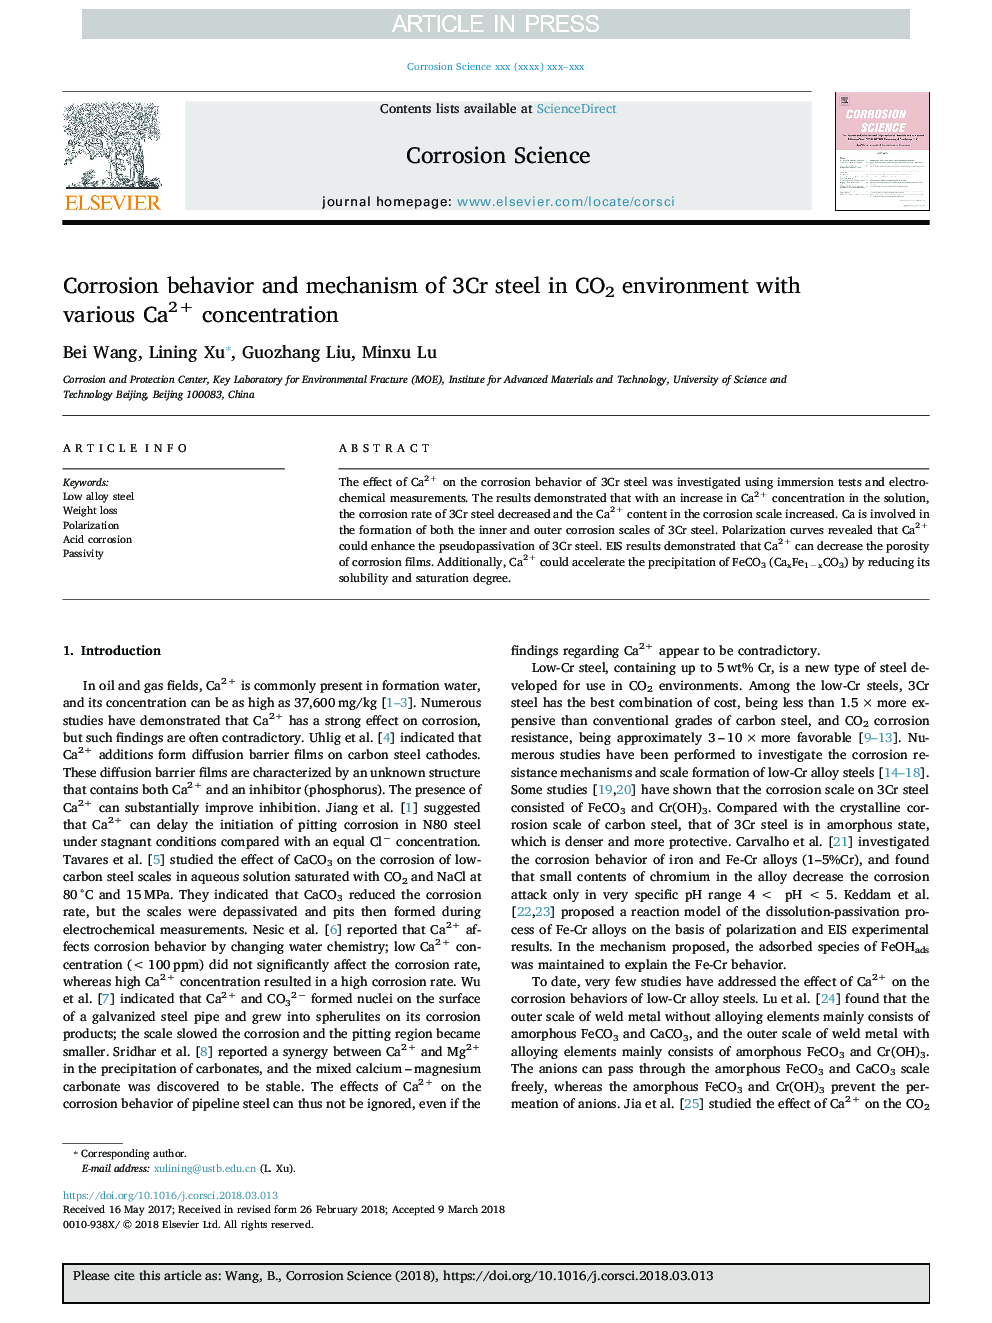 Corrosion behavior and mechanism of 3Cr steel in CO2 environment with various Ca2+ concentration